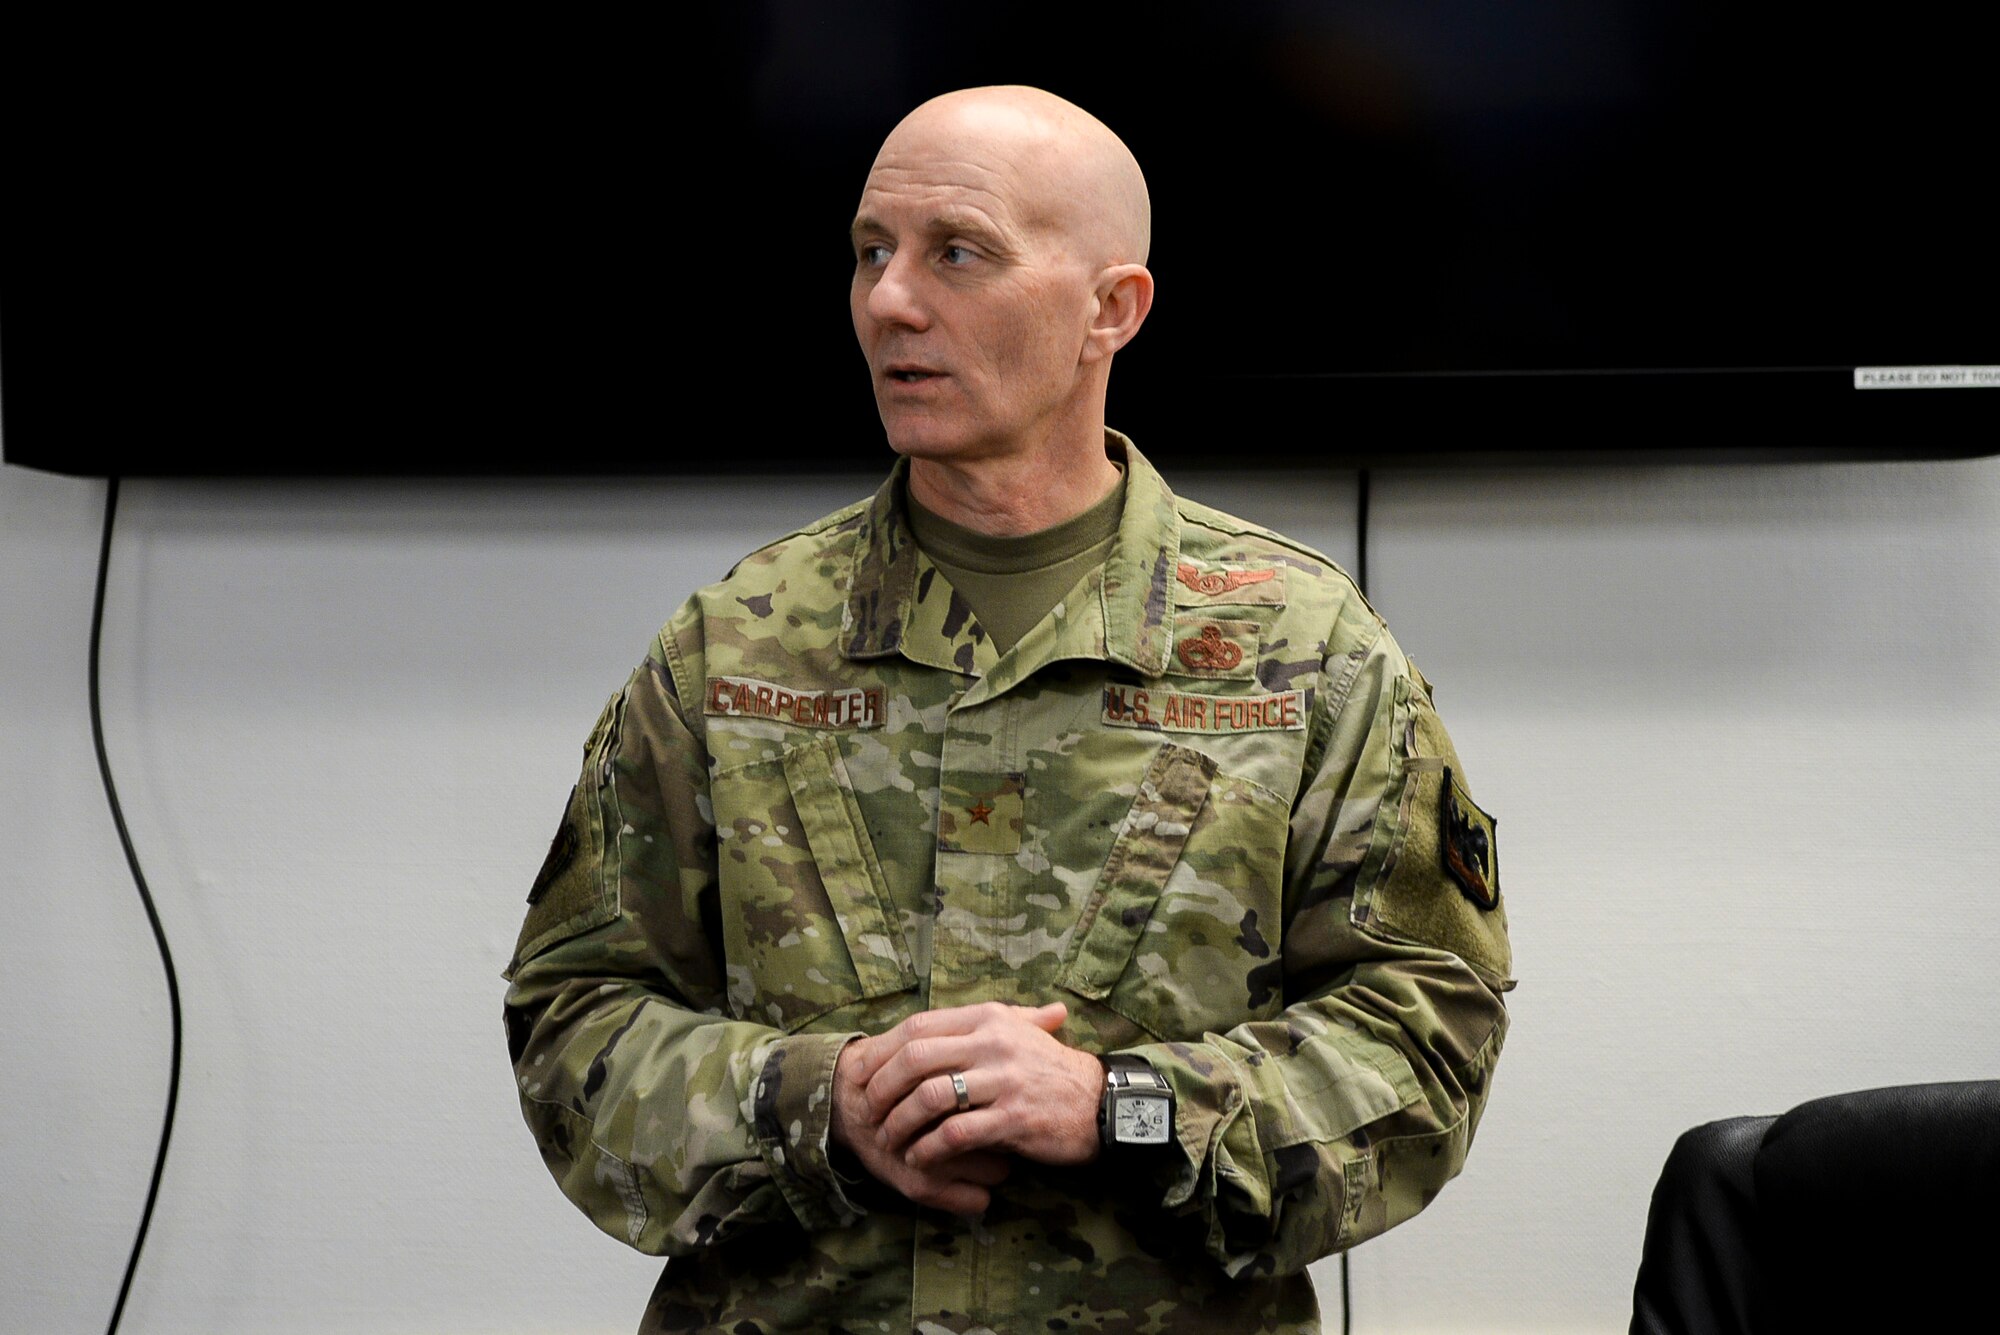 An image of U.S. Air Force Brig. Gen. Donald K. Carpenter, director of Logistics, Engineering and Force Protection, National Guard Bureau, conducting a briefing.